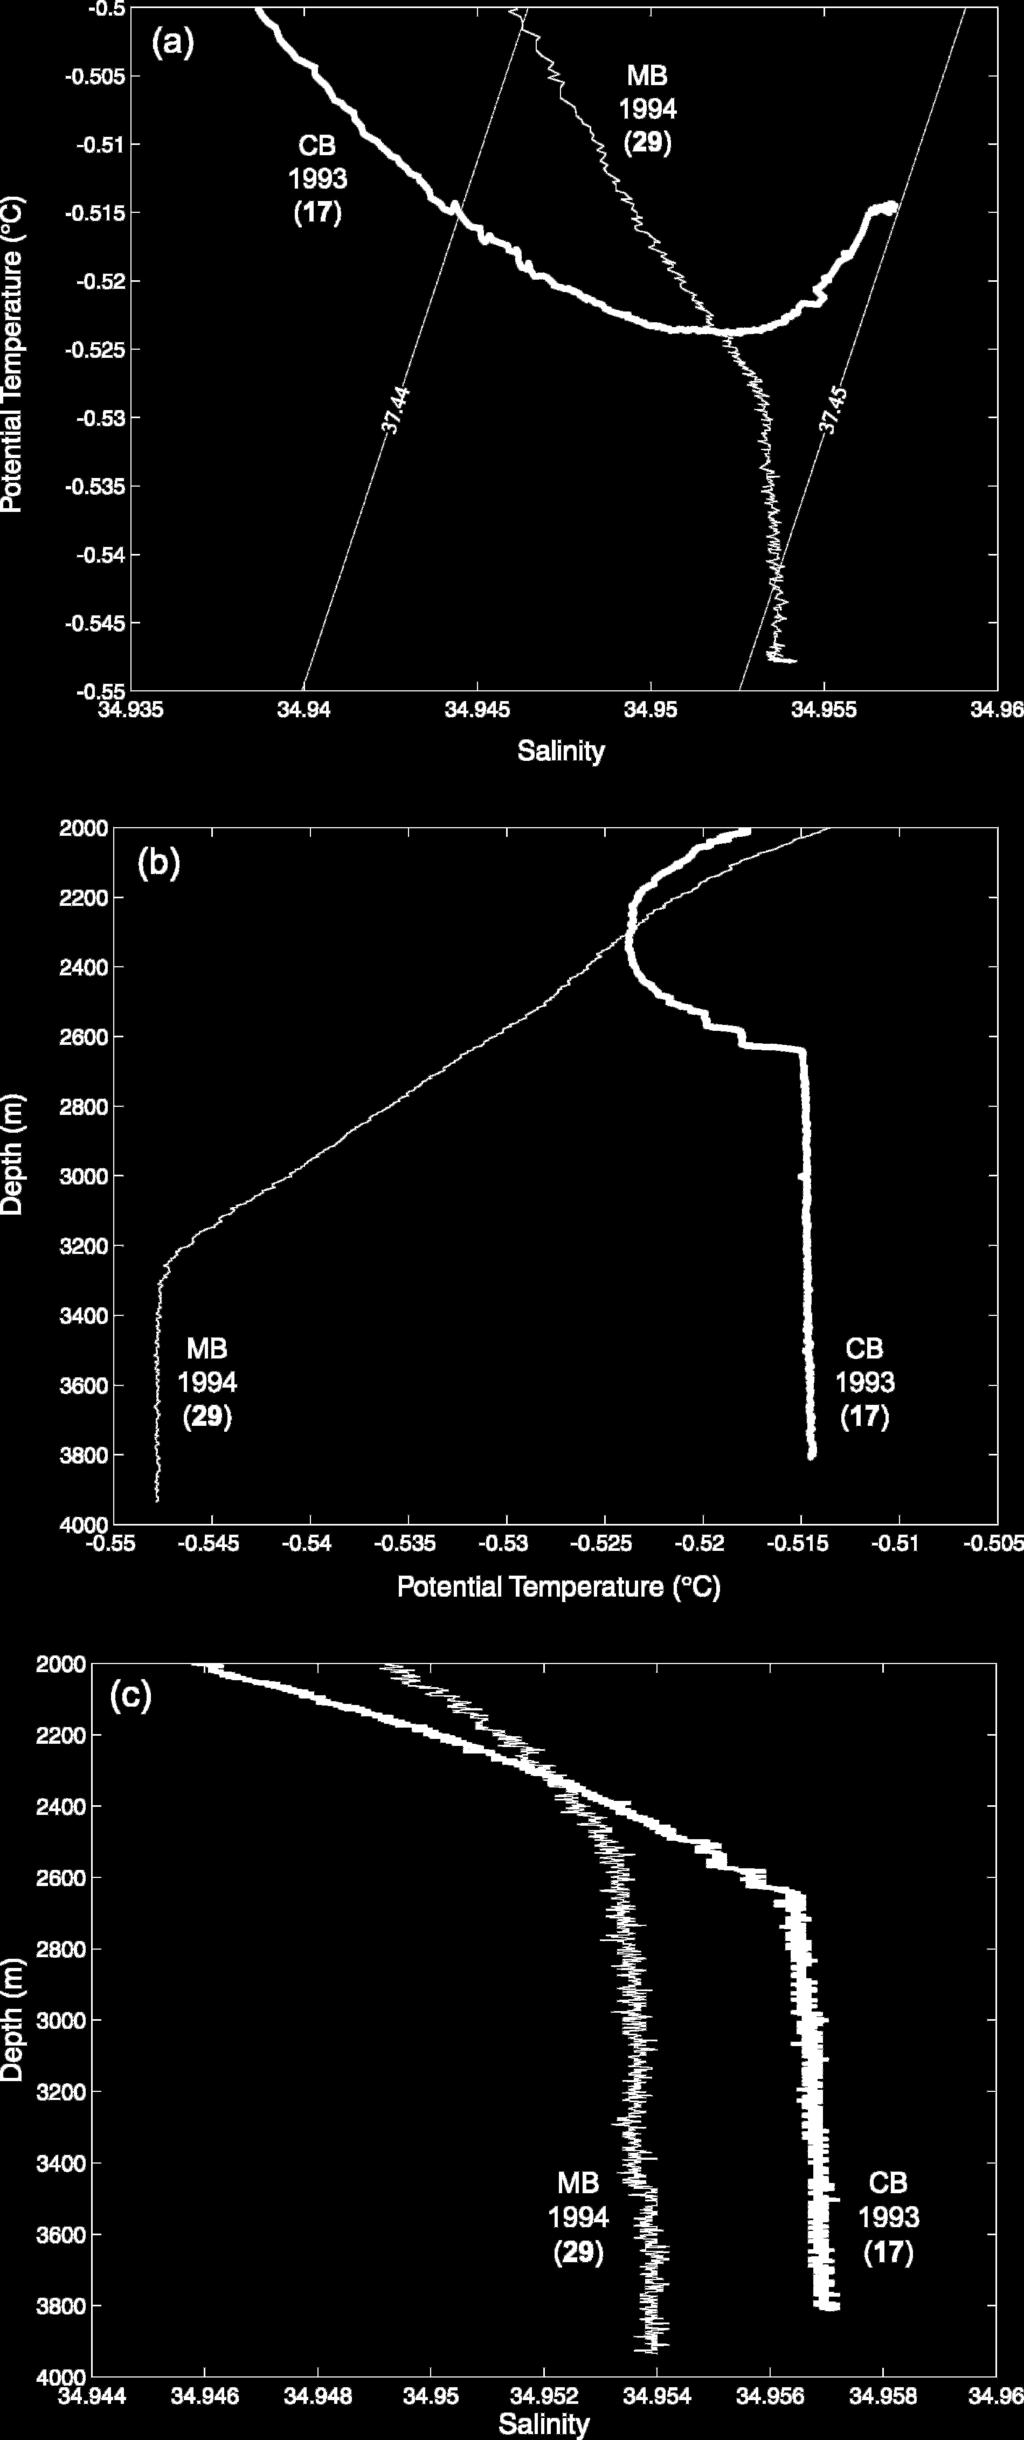 St-Laurent expeditions used in this study are shown. Matching symbols indicate cast pairs used in the volume flow-rate calculations (see Fig. 9). The thick black line is the 2400-m contour.